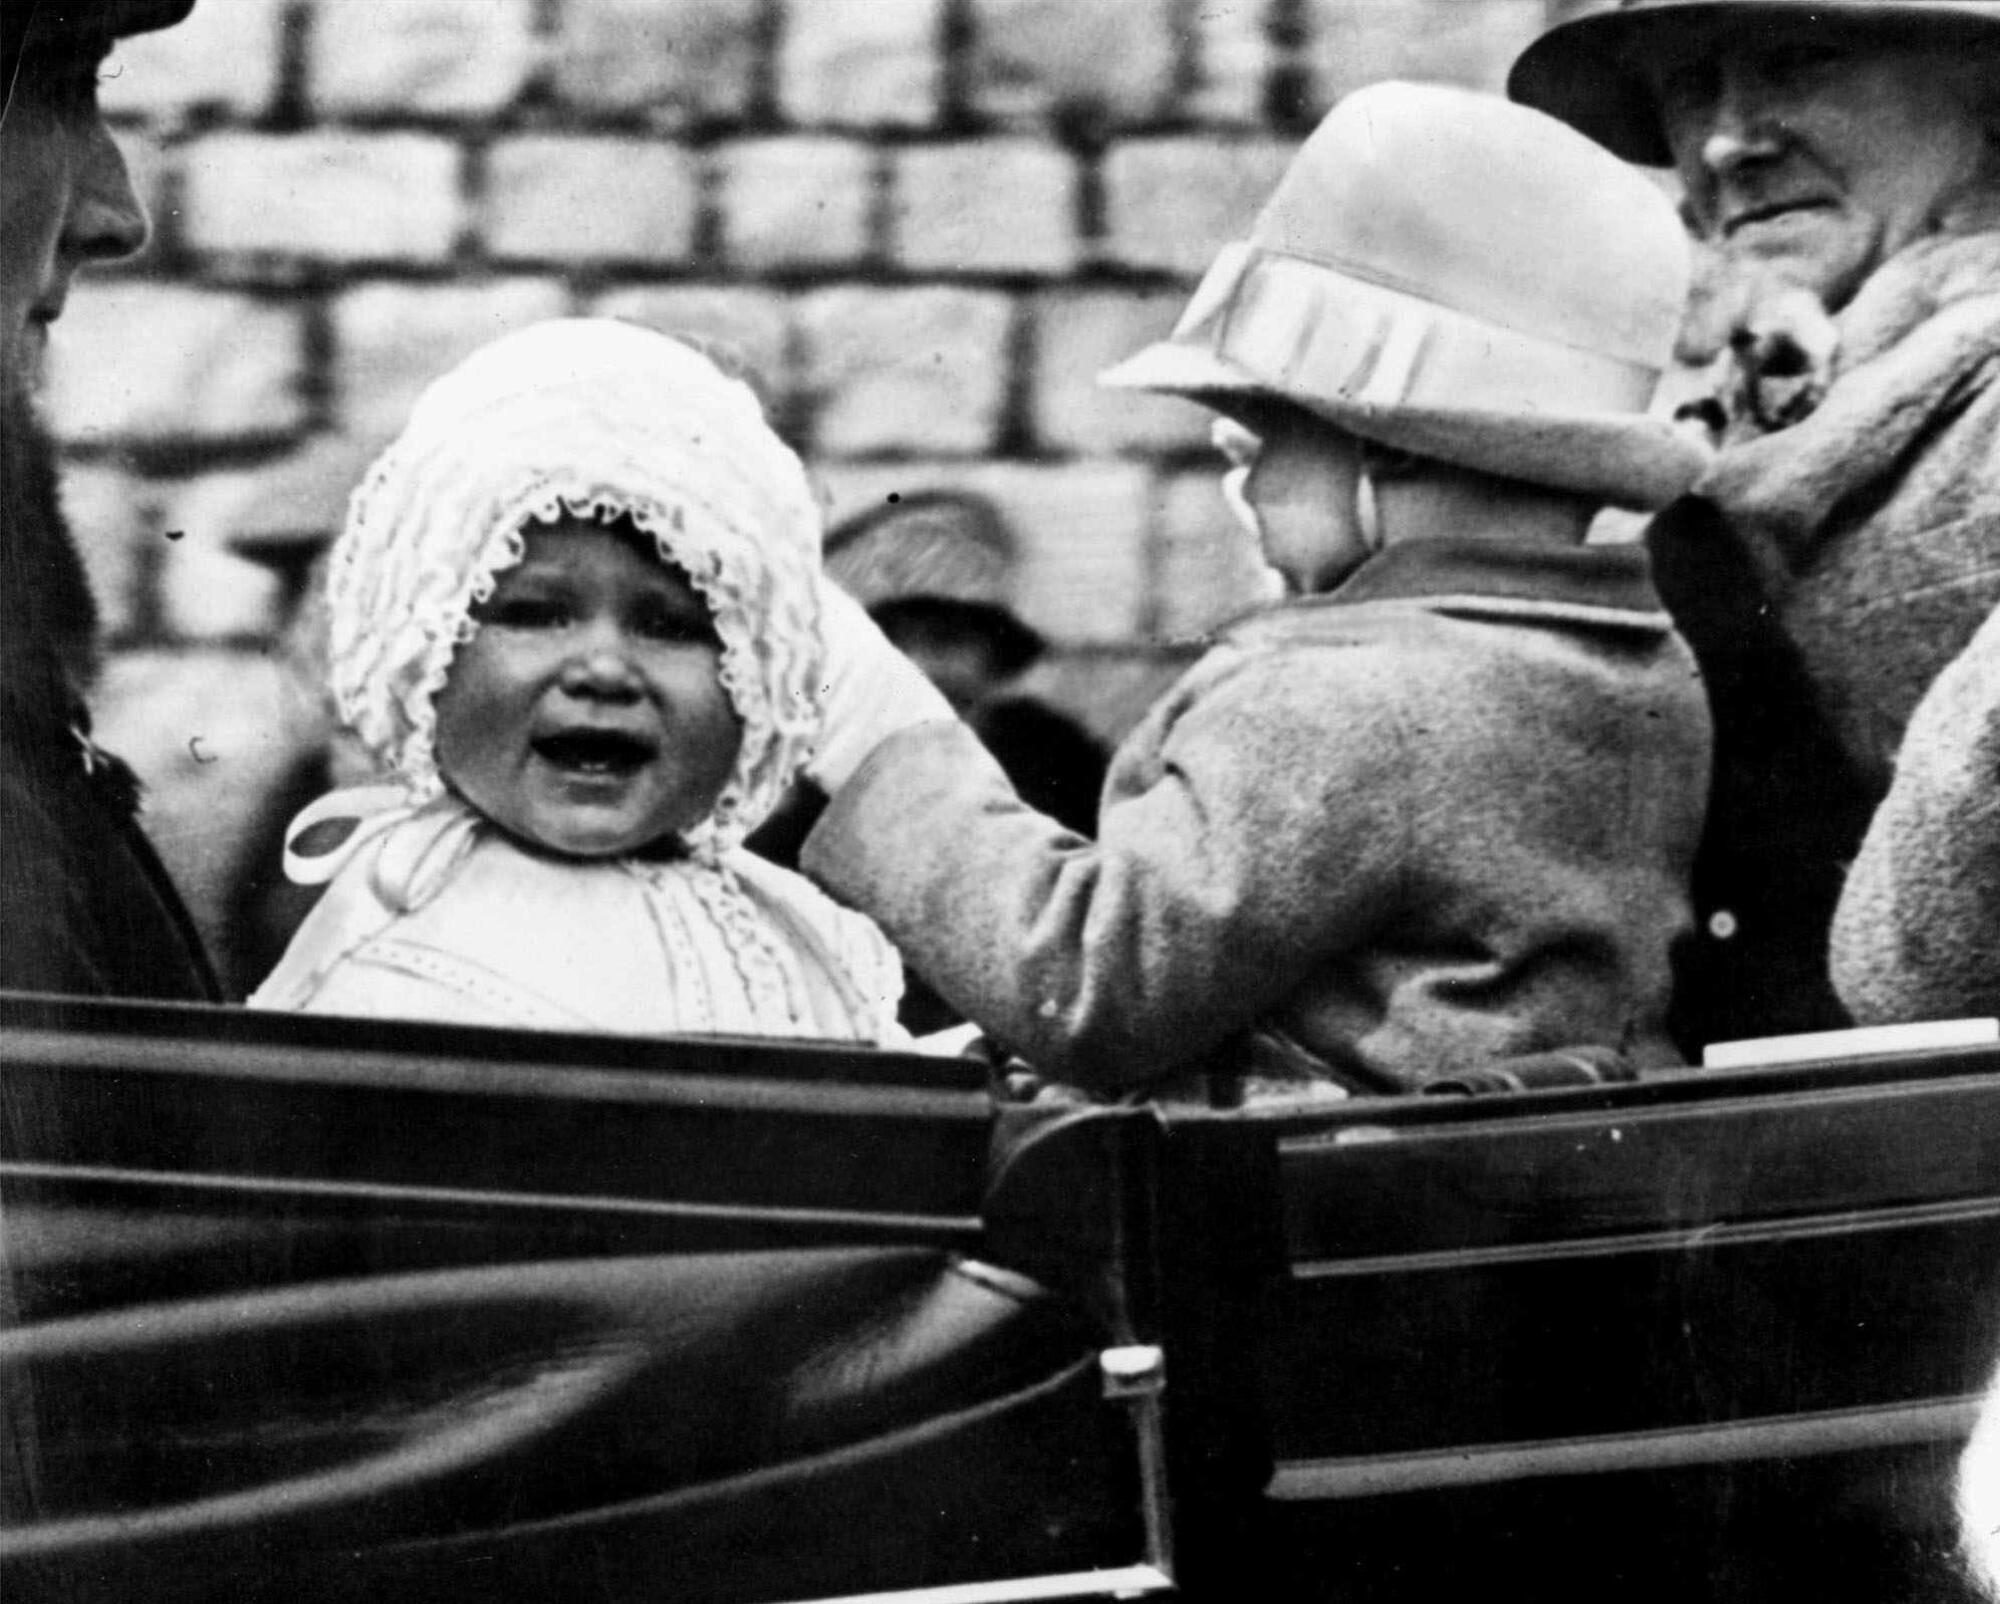 A young boy and girl ride in an open vehicle with adults.